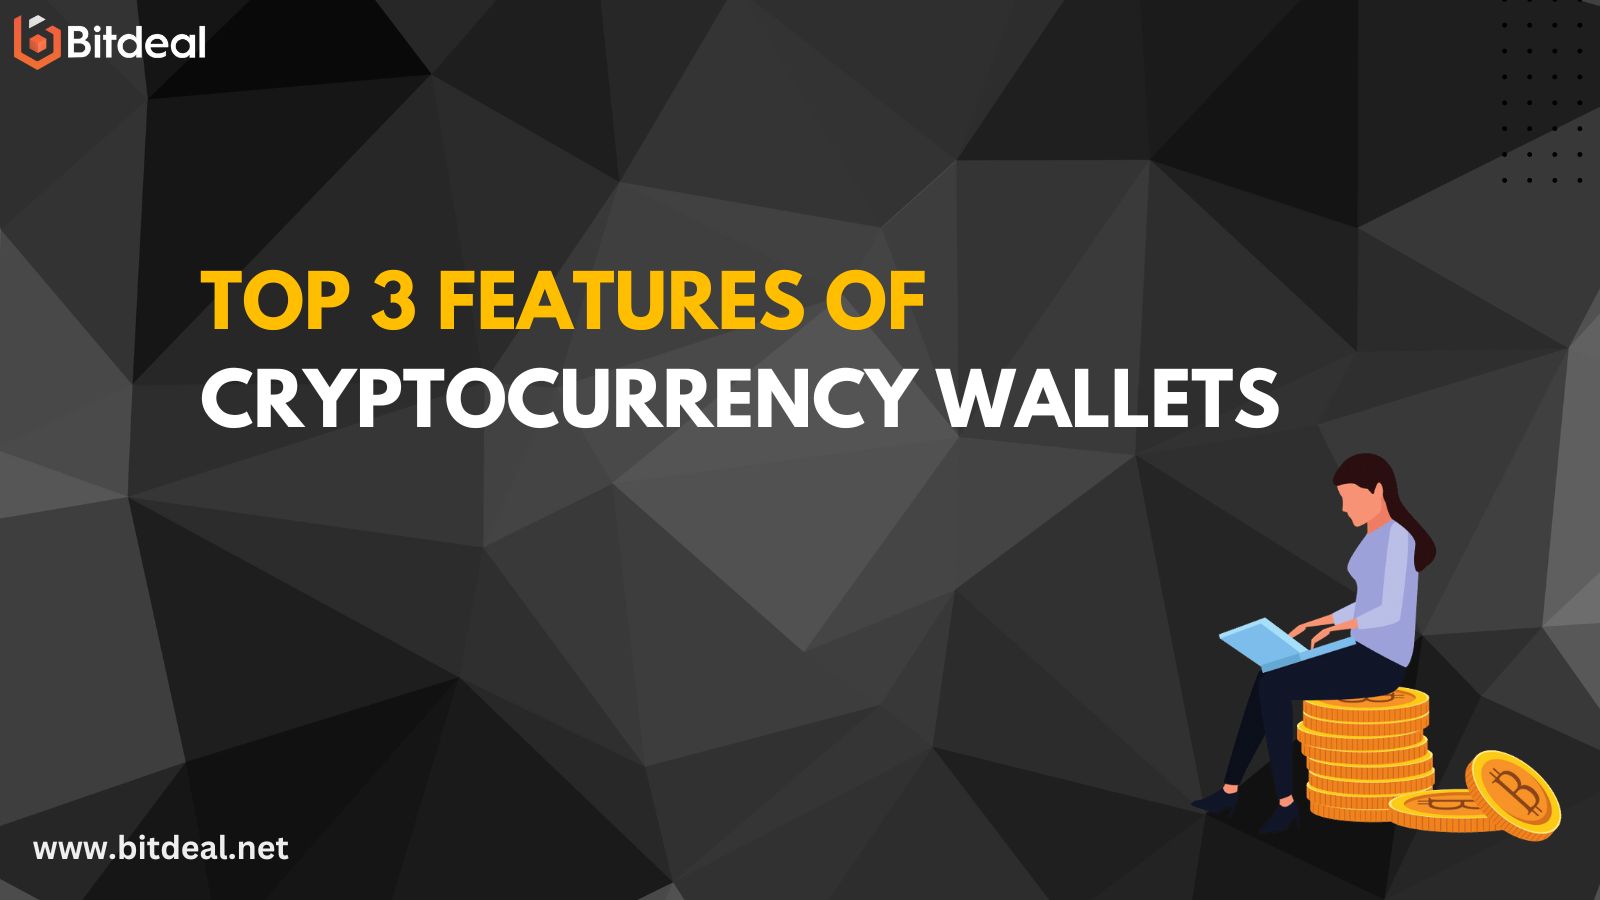 Top 3 Features of Cryptocurrency Wallets